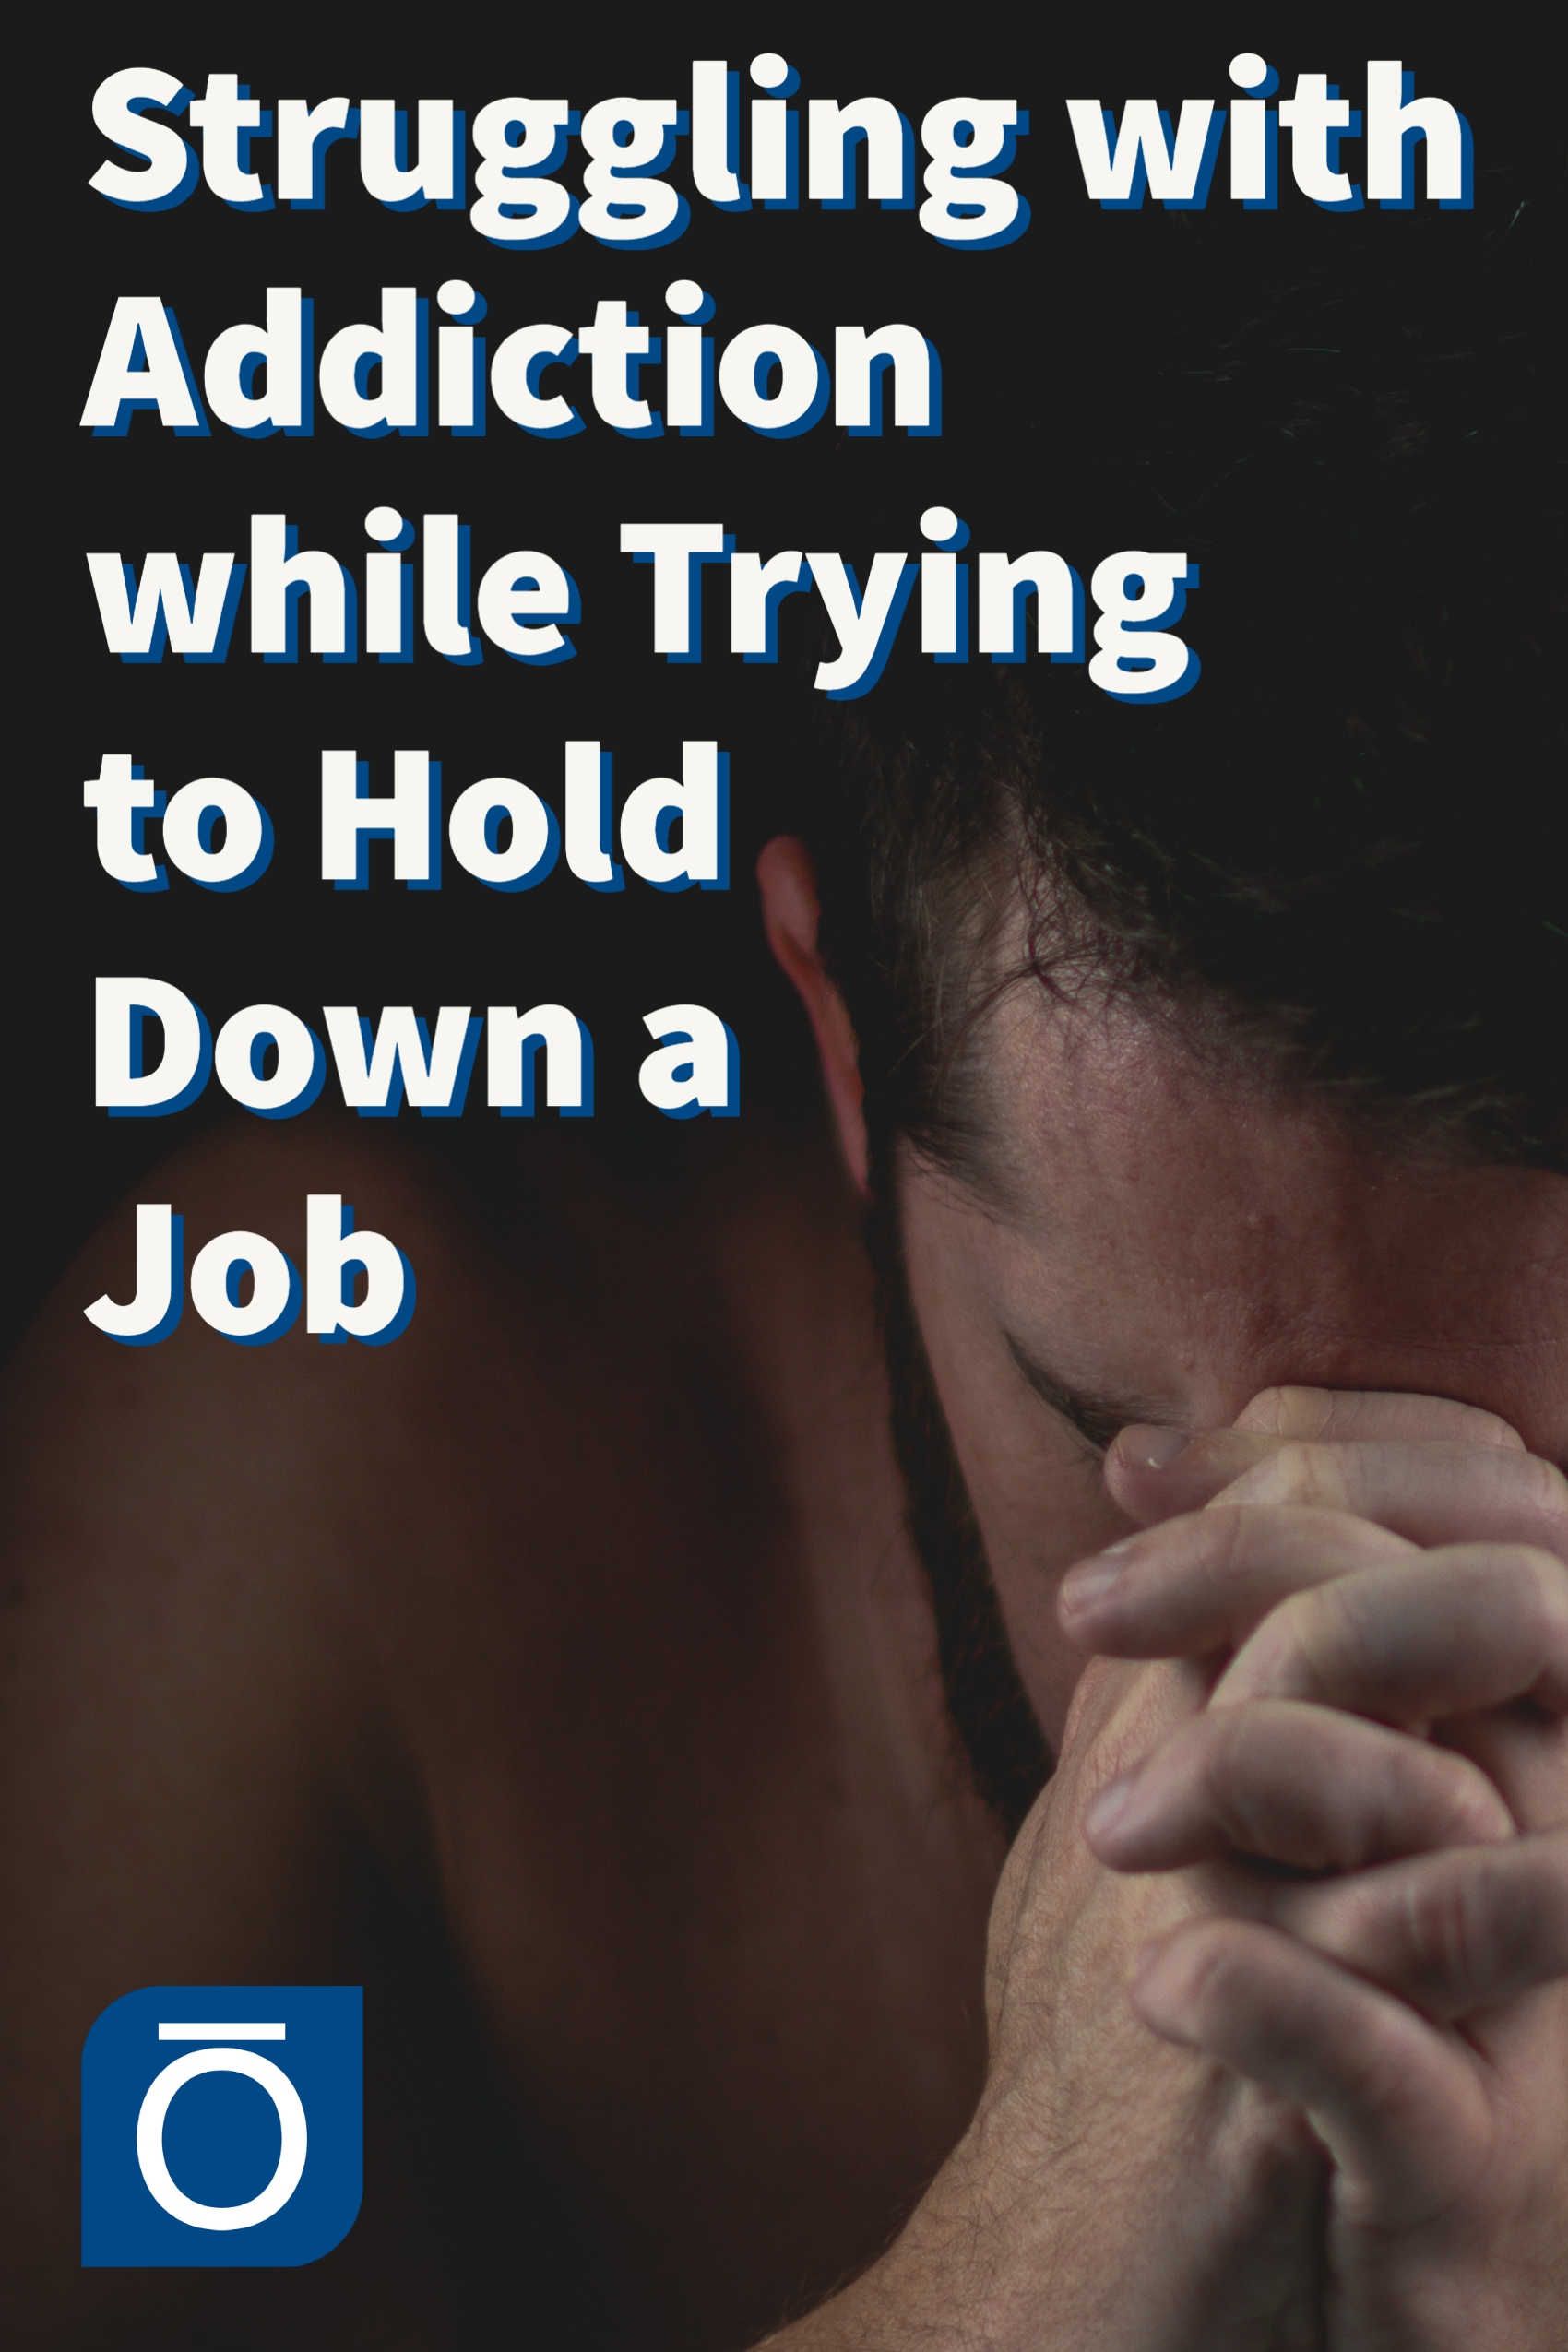 A man submerged in shadow with the post title 'Struggling with Addiction while Trying to Hold Down a Job' in white letters. Learn how Employee Assistance Programs and stress management techniques can help manage addiction while maintaining employment.